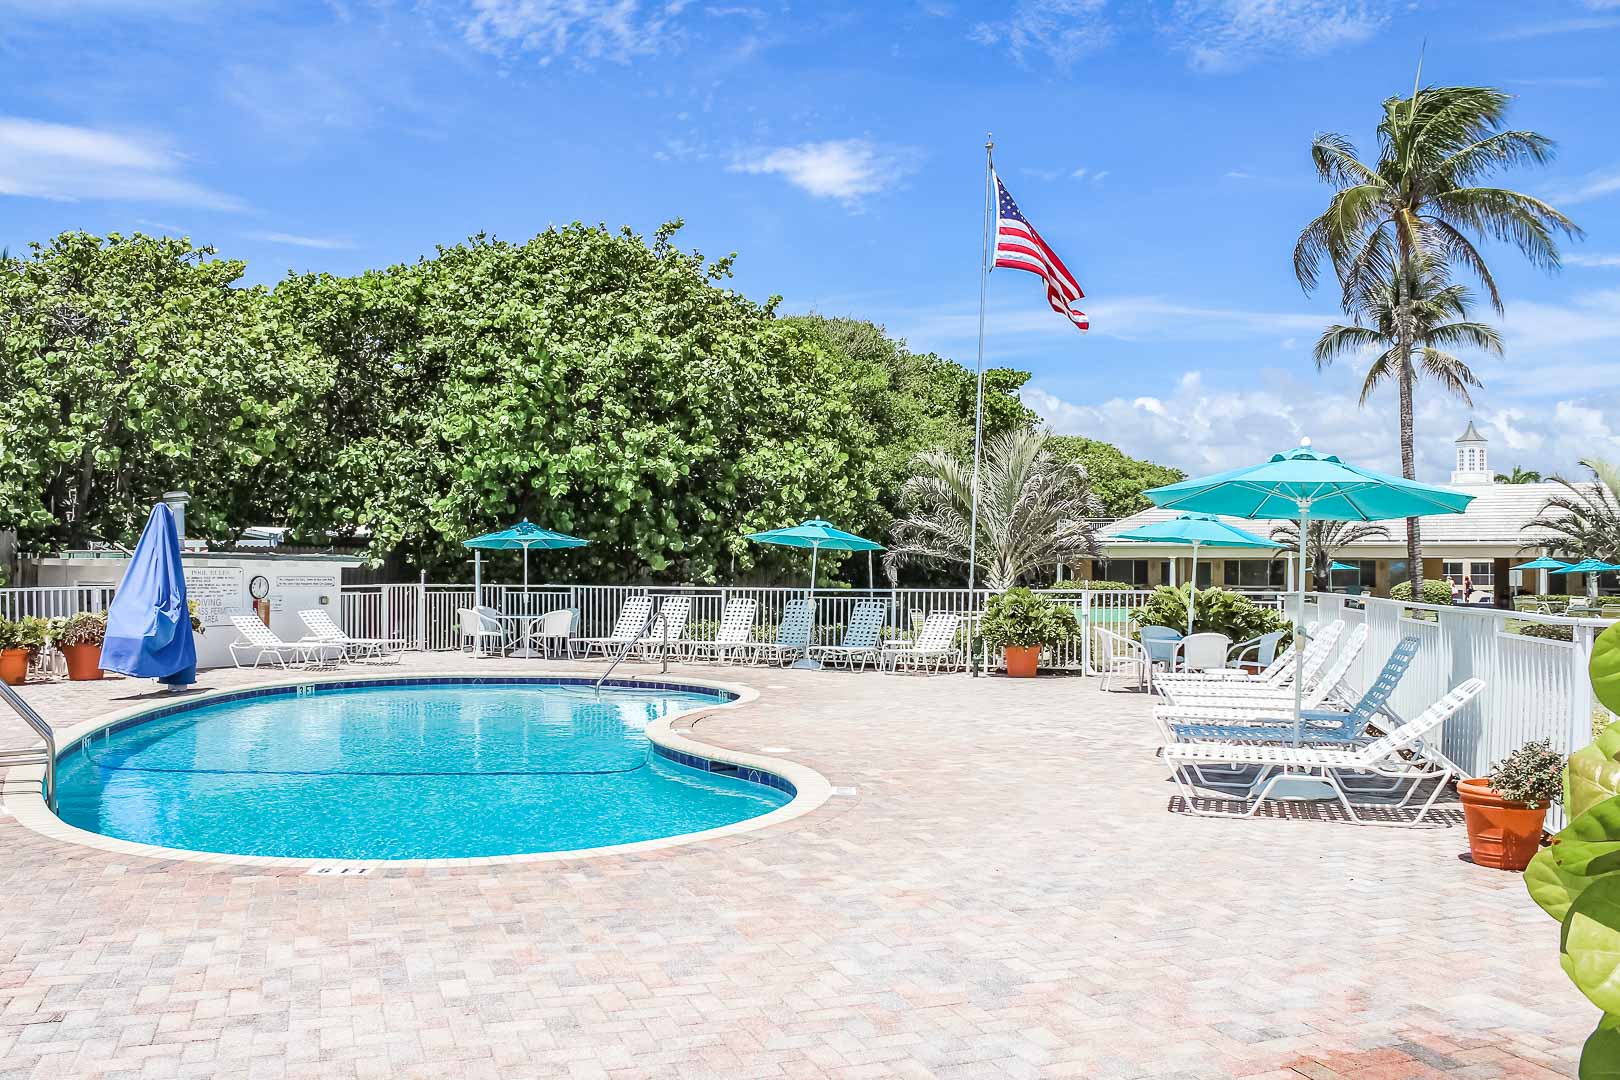 A refreshing swimming pool at VRI's Berkshire on the Ocean in Florida.